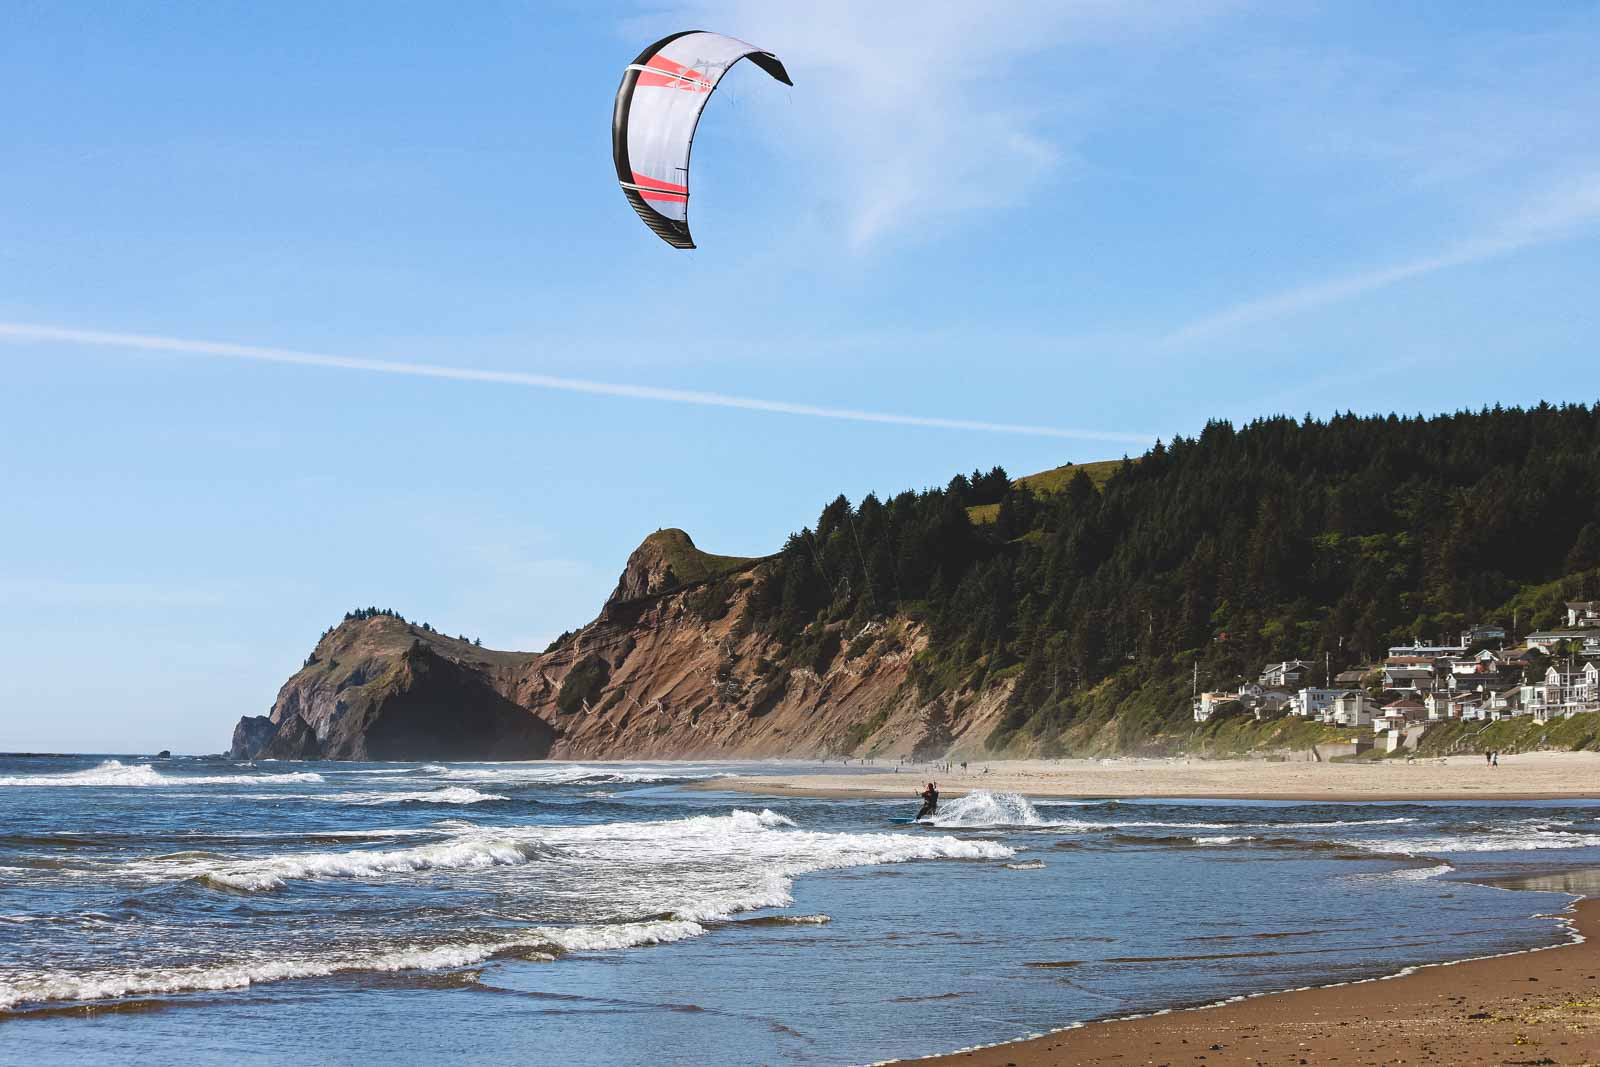 Kite surfer in action with headland in background besides Lincoln City.